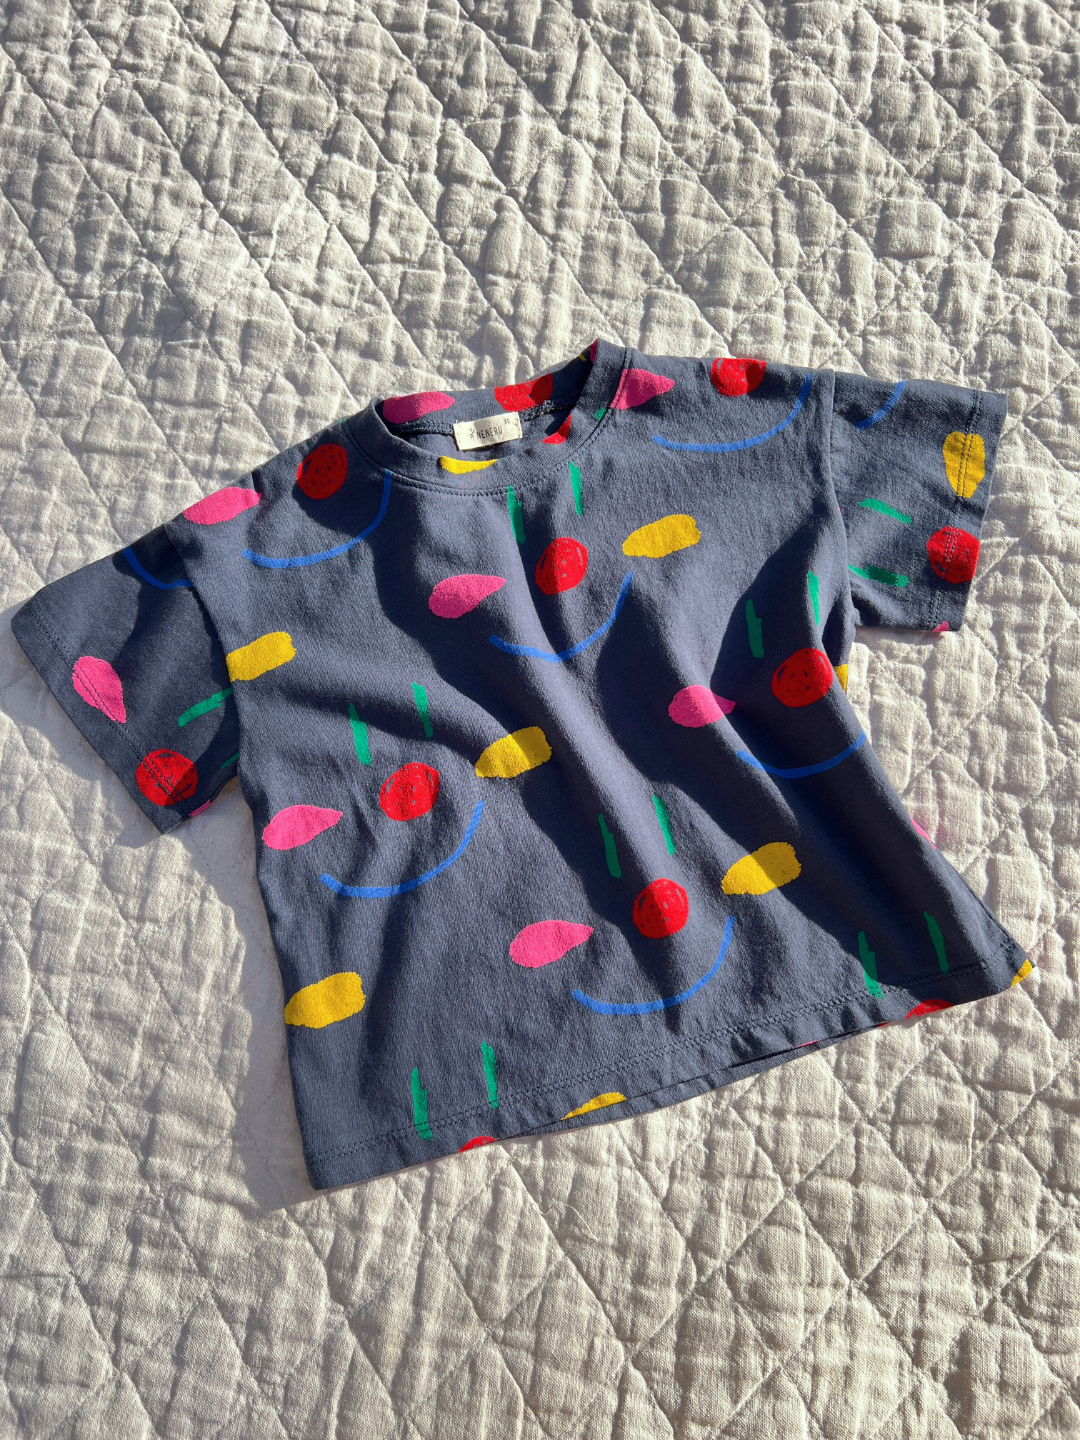 A kids' Facepaint Tee in Navy laid flat on a quilt in the sun